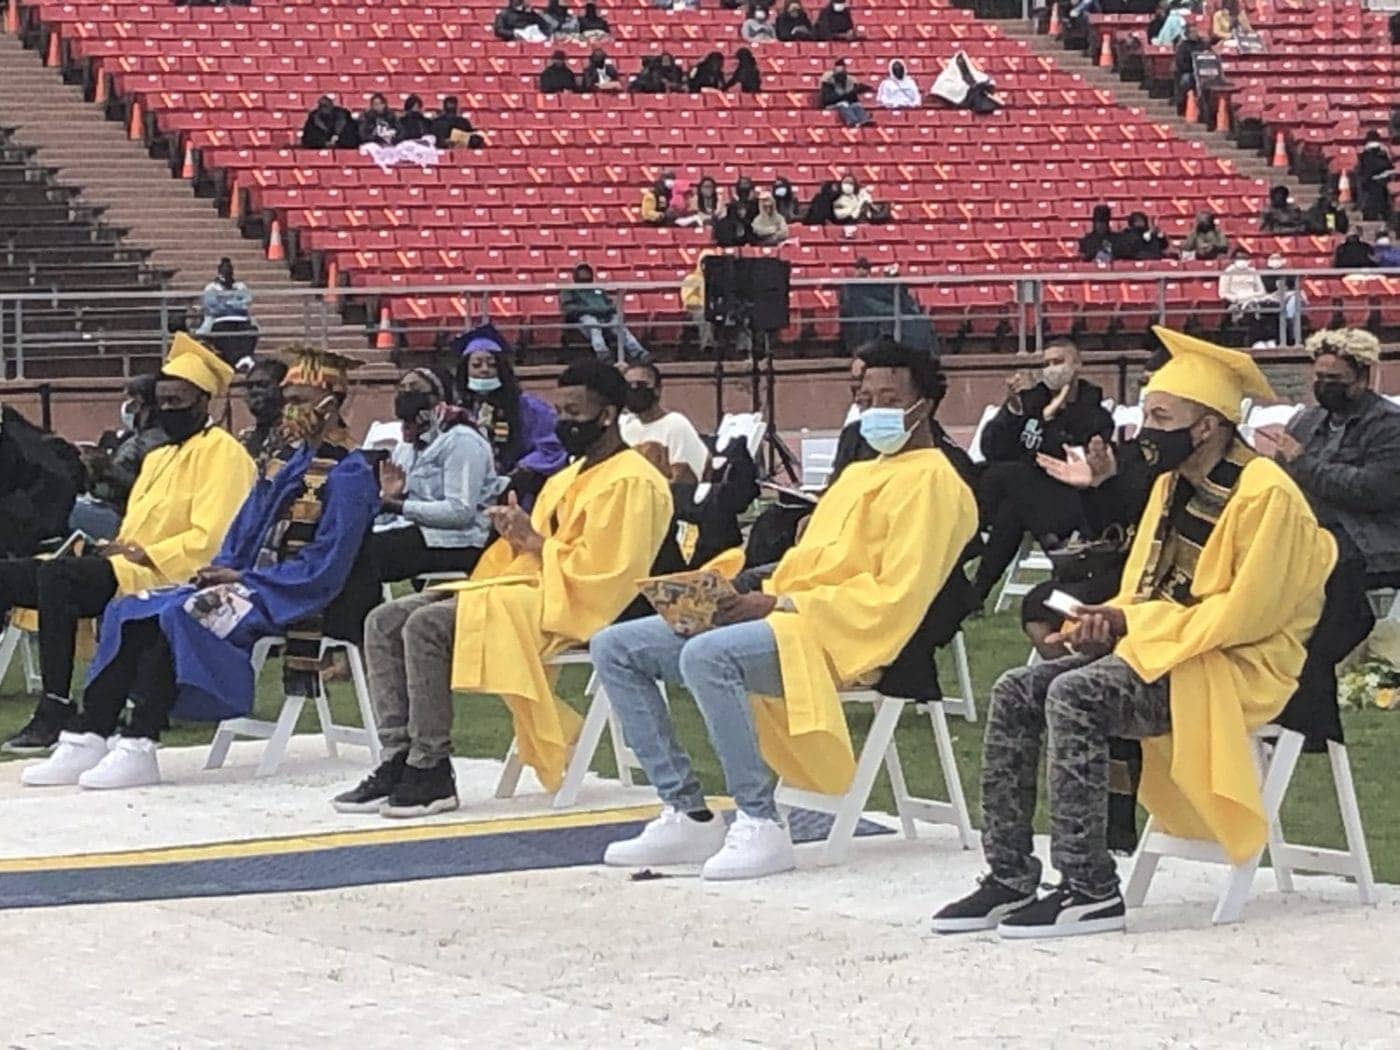 SFUSD-high-school-graduates-seated-on-the-Second-Annual-Black-Graduation-at-Kezar-Pavilion-Stadium-by-Daphne-Young-060421-1400x1050, Black graduates celebrate big at 2021 Rites of Passage ceremony!, Culture Currents Eye on Education 